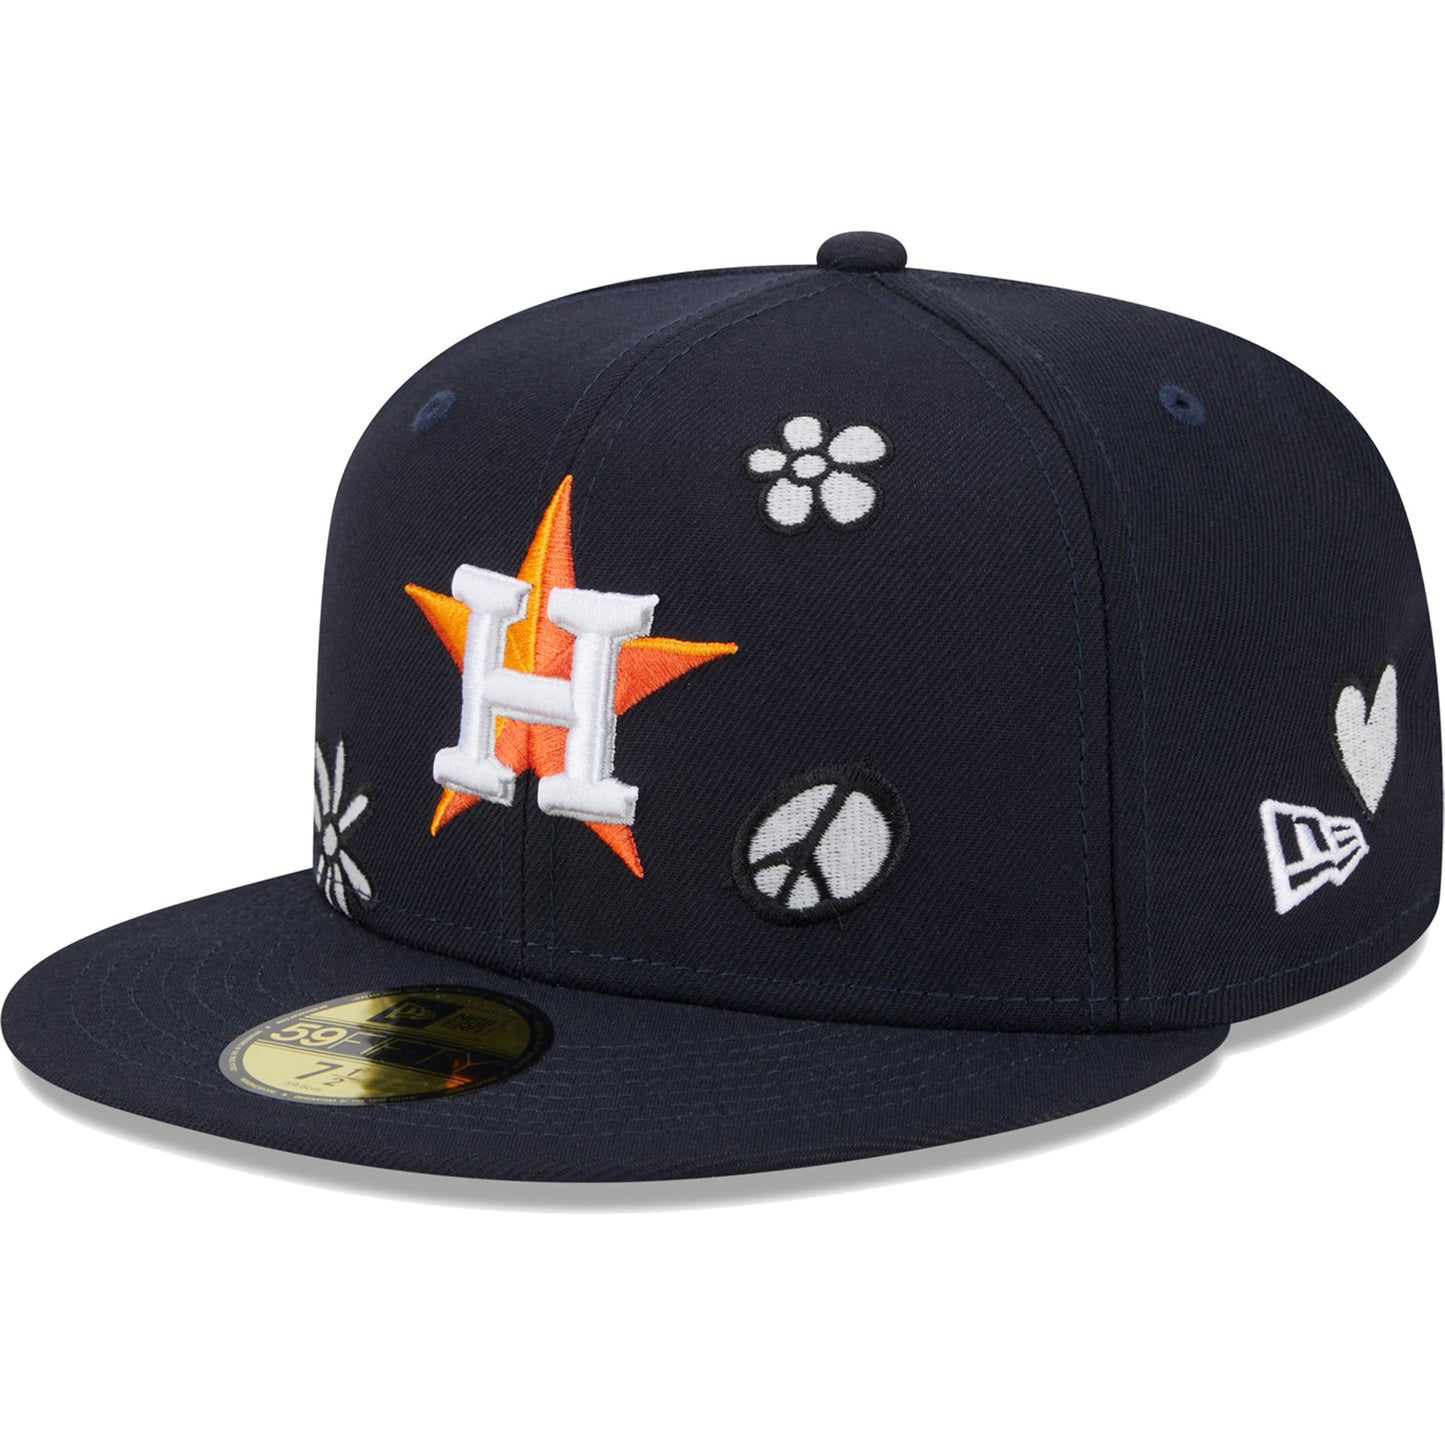 Houston Astros New Era Sunlight Pop 59FIFTY Fitted Hat - Navy